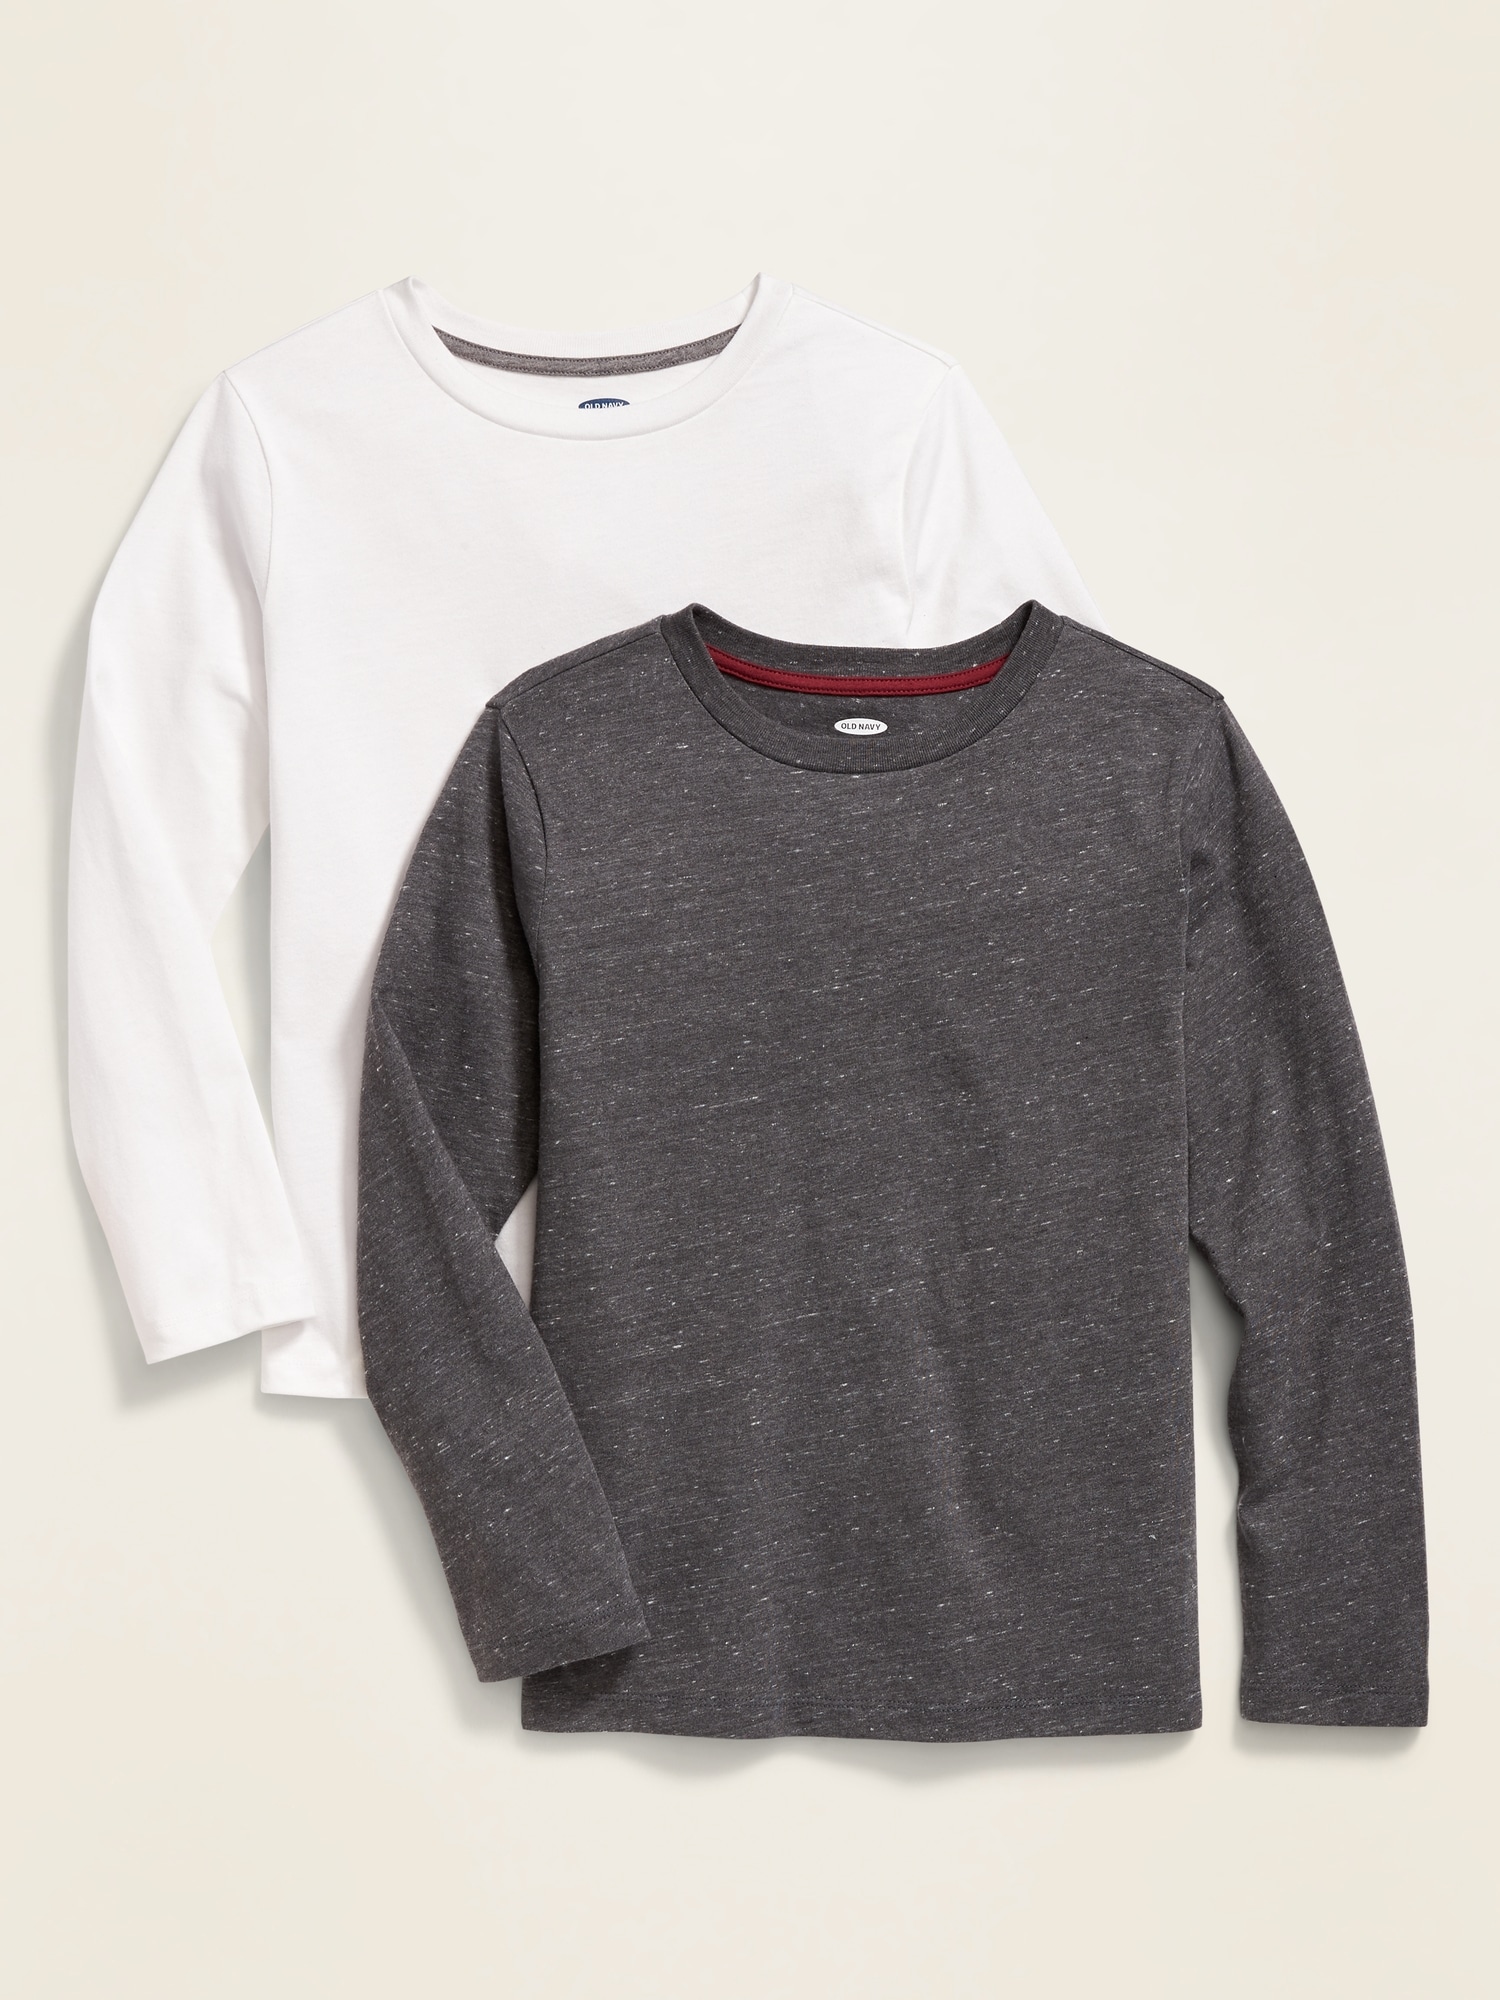 Softest Long-Sleeve Tee 2-Pack for Boys | Old Navy